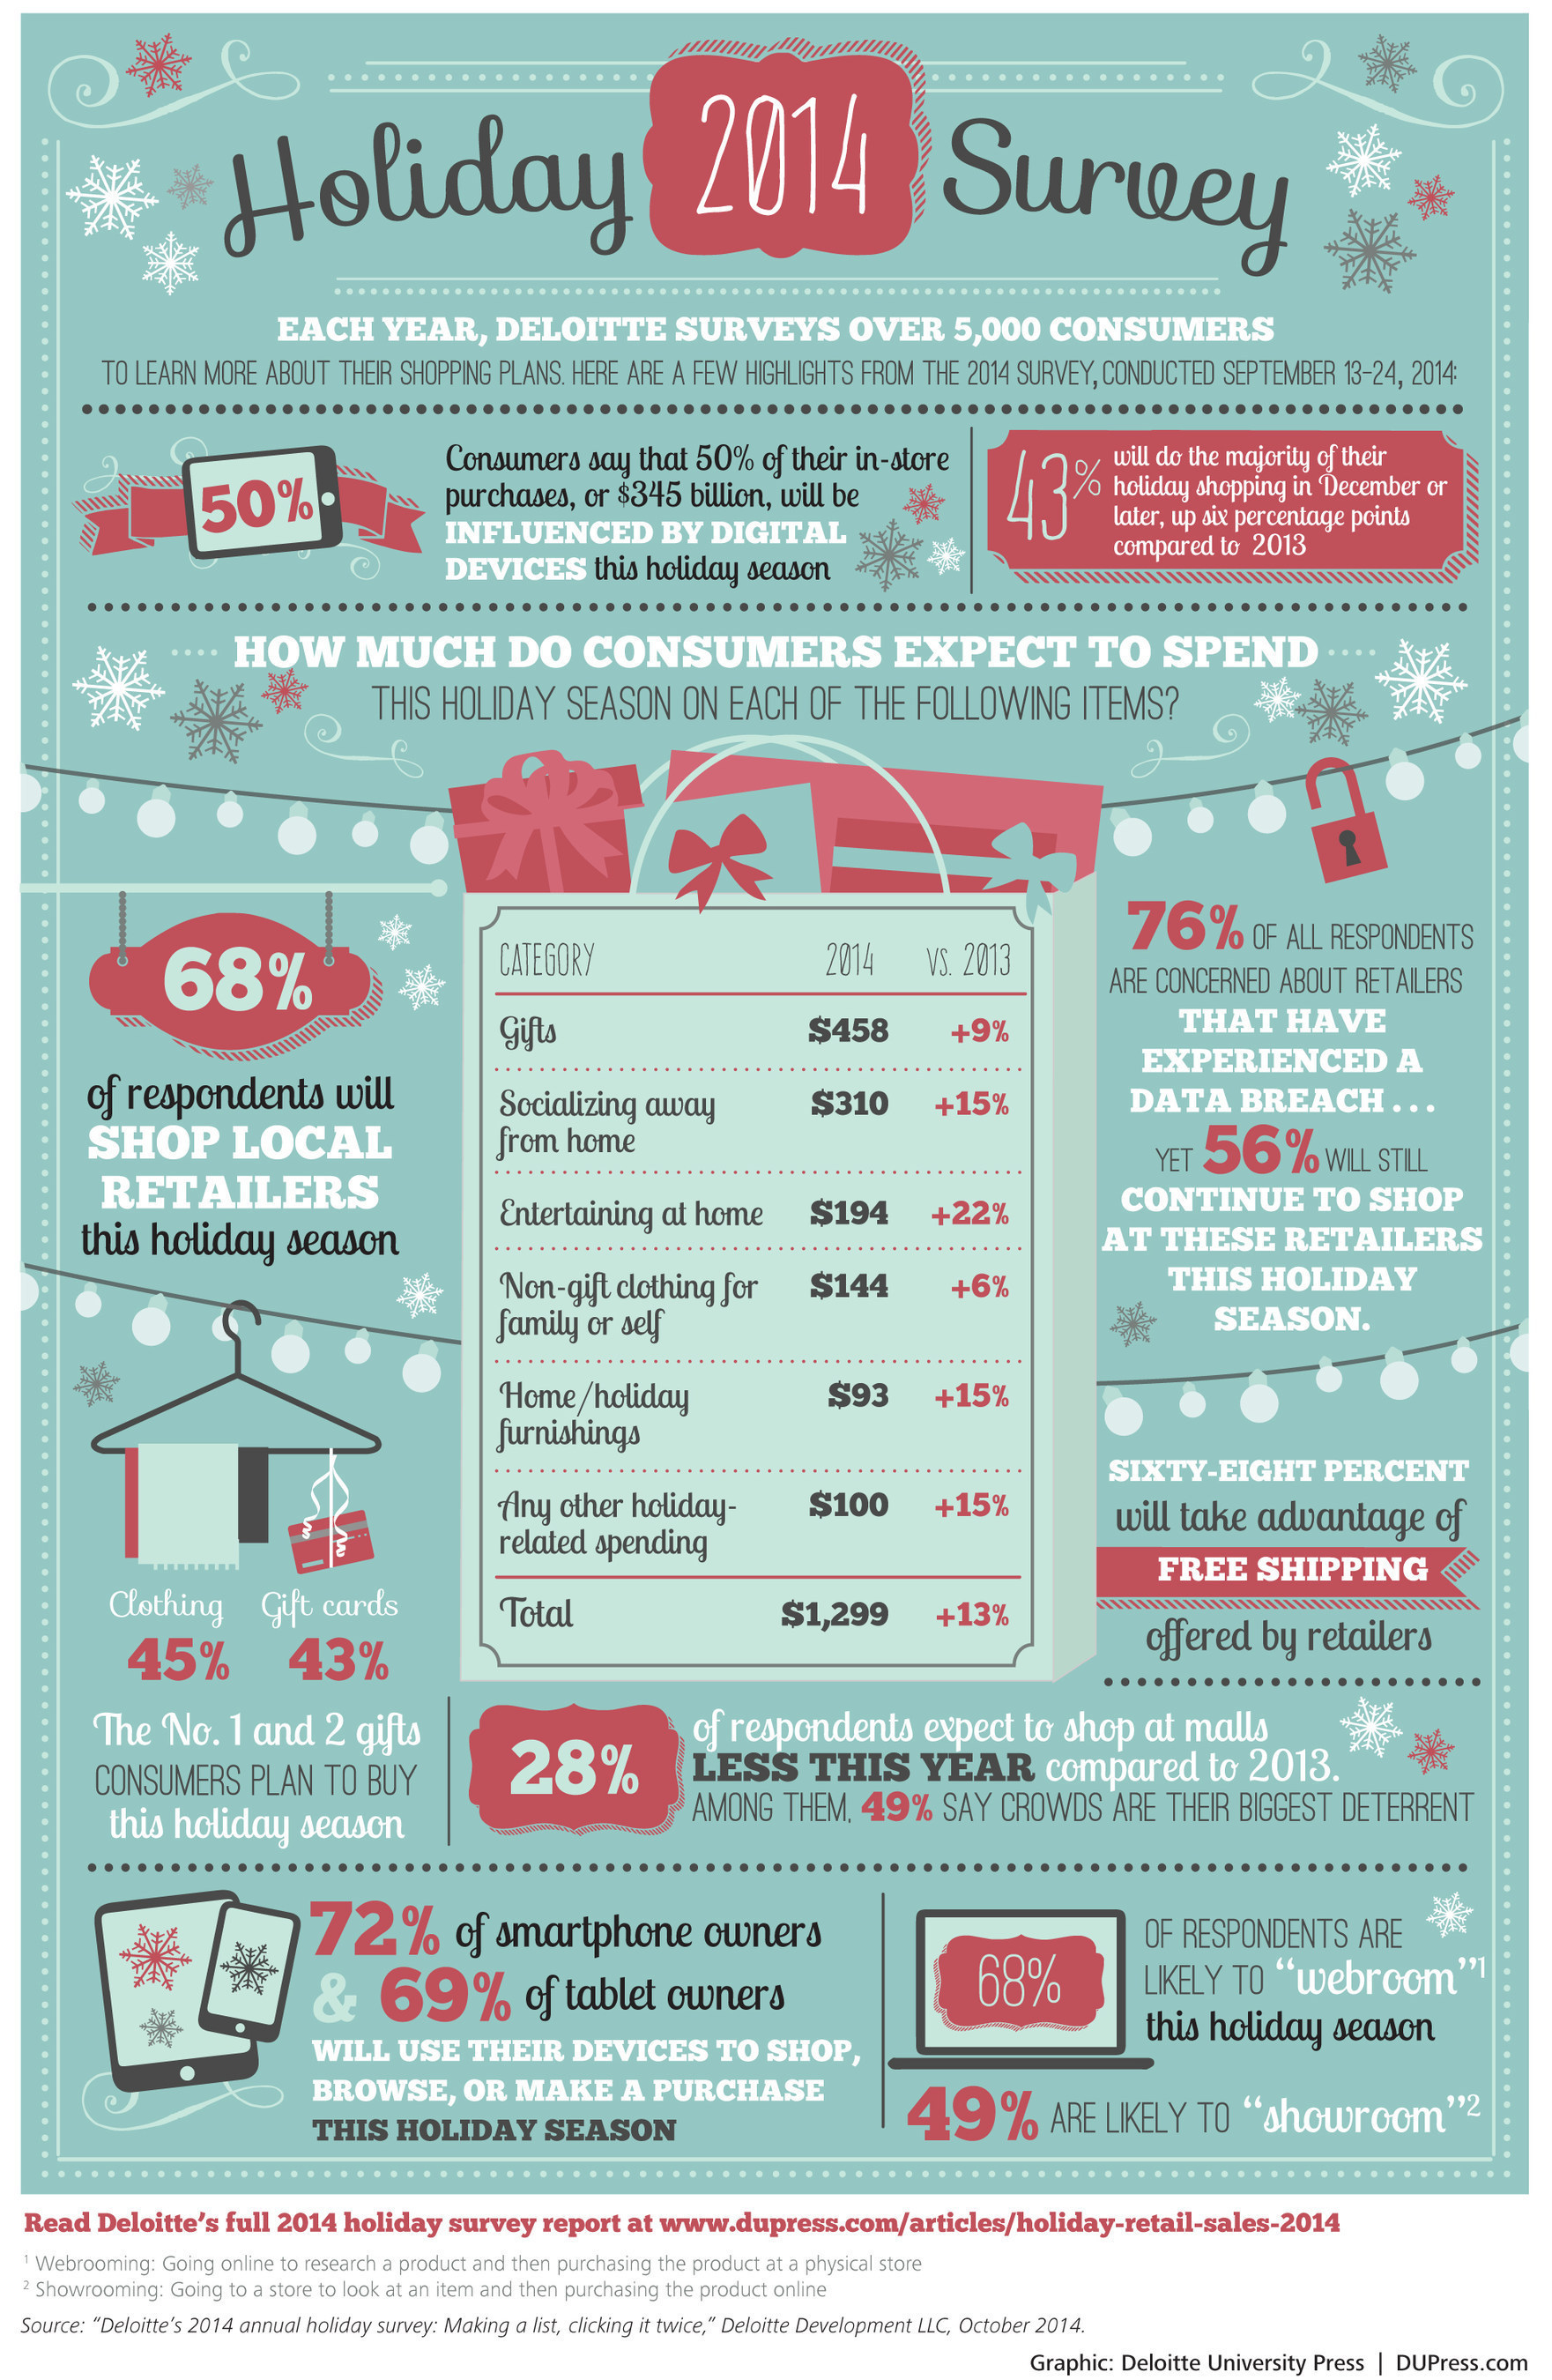 Deloitte 2014 Holiday Shopping Survey Infographic